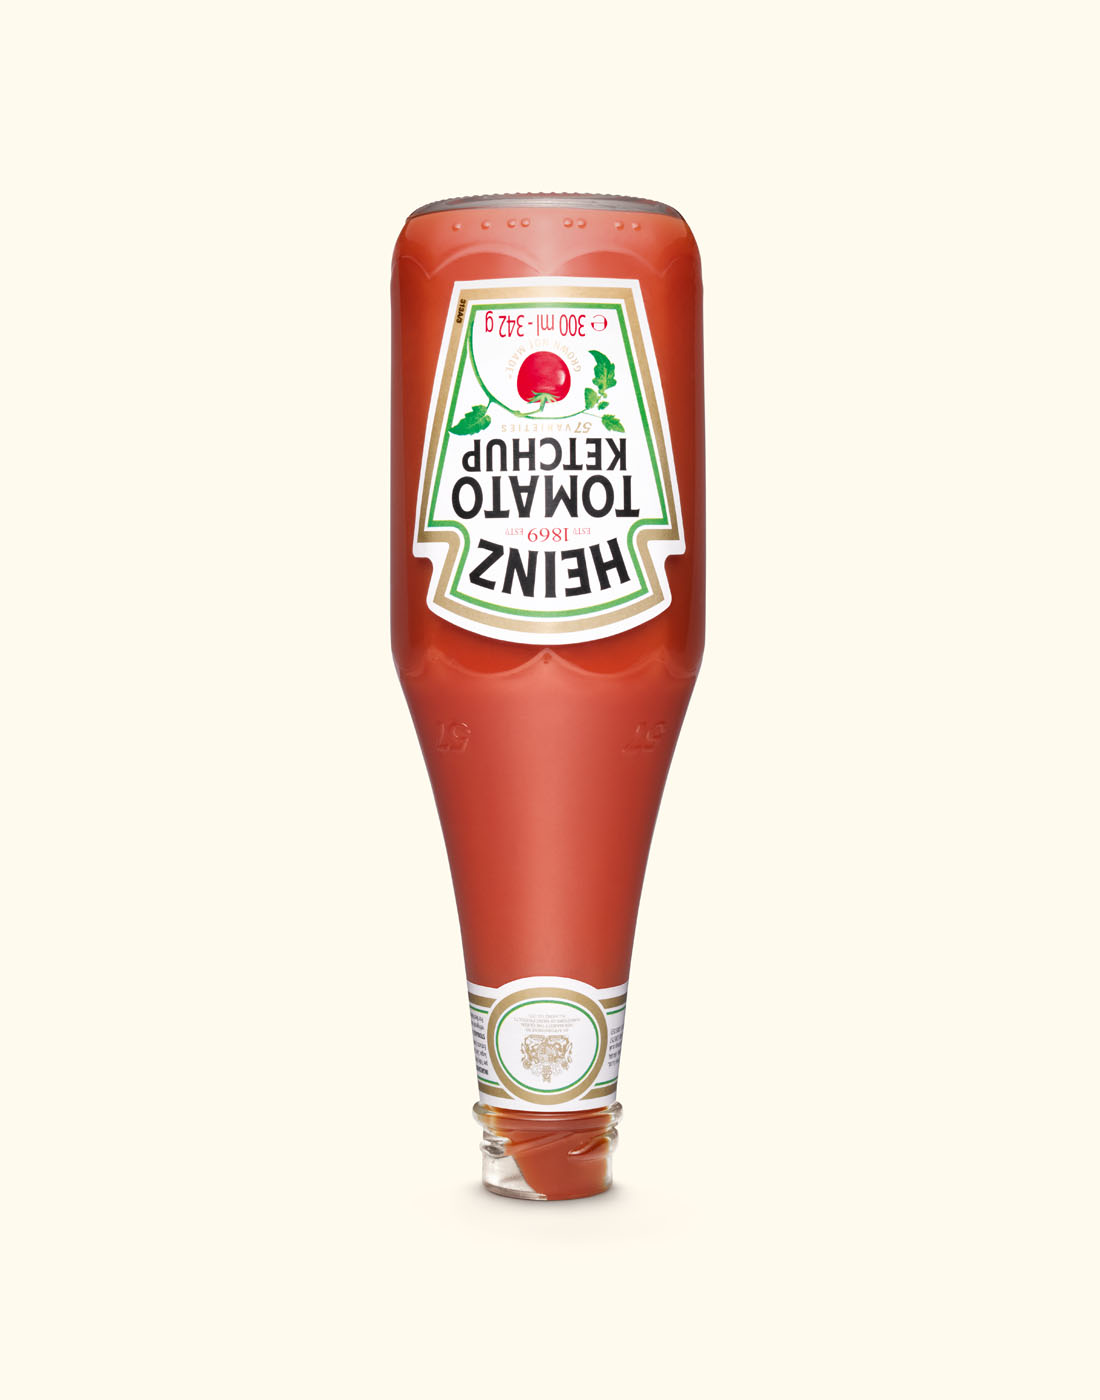 Heinz Ketchup  by Alexander Kent London based still life and product photographer.